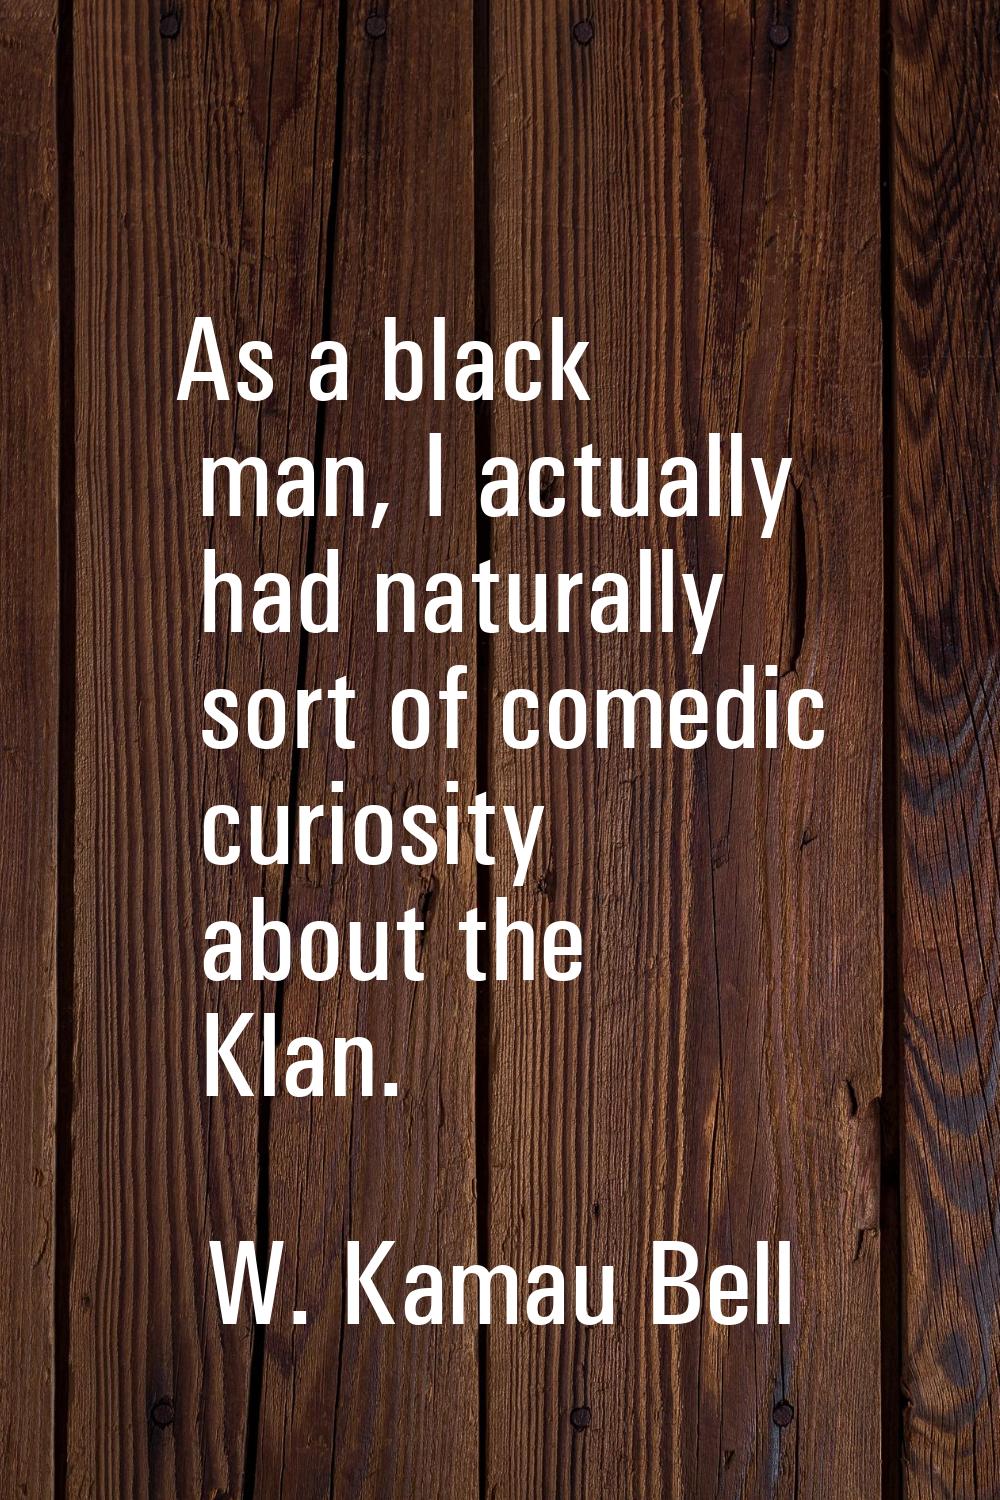 As a black man, I actually had naturally sort of comedic curiosity about the Klan.